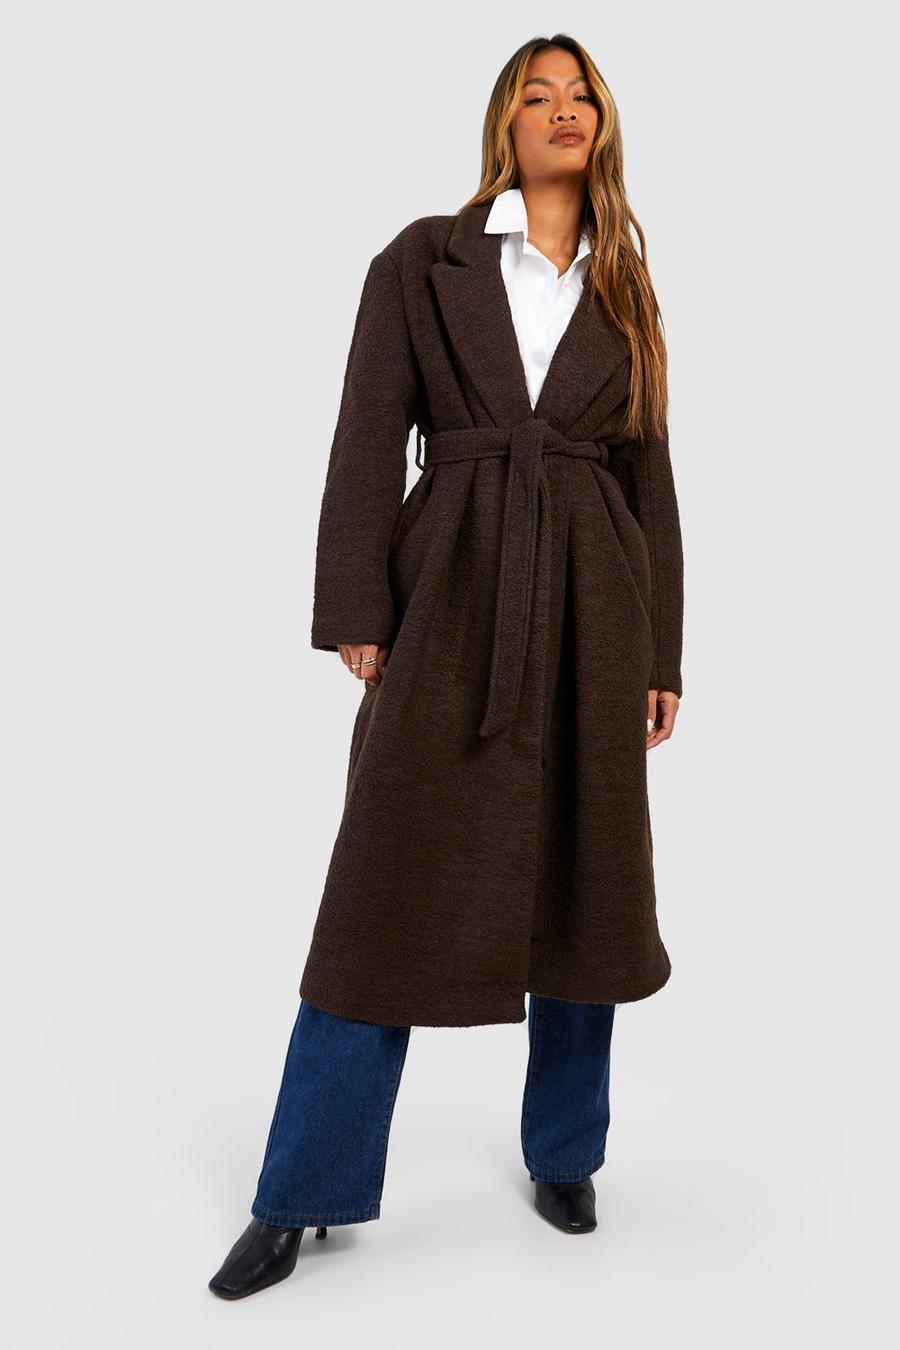 Chocolate Petite Boucle Belted Wool Coat image number 1